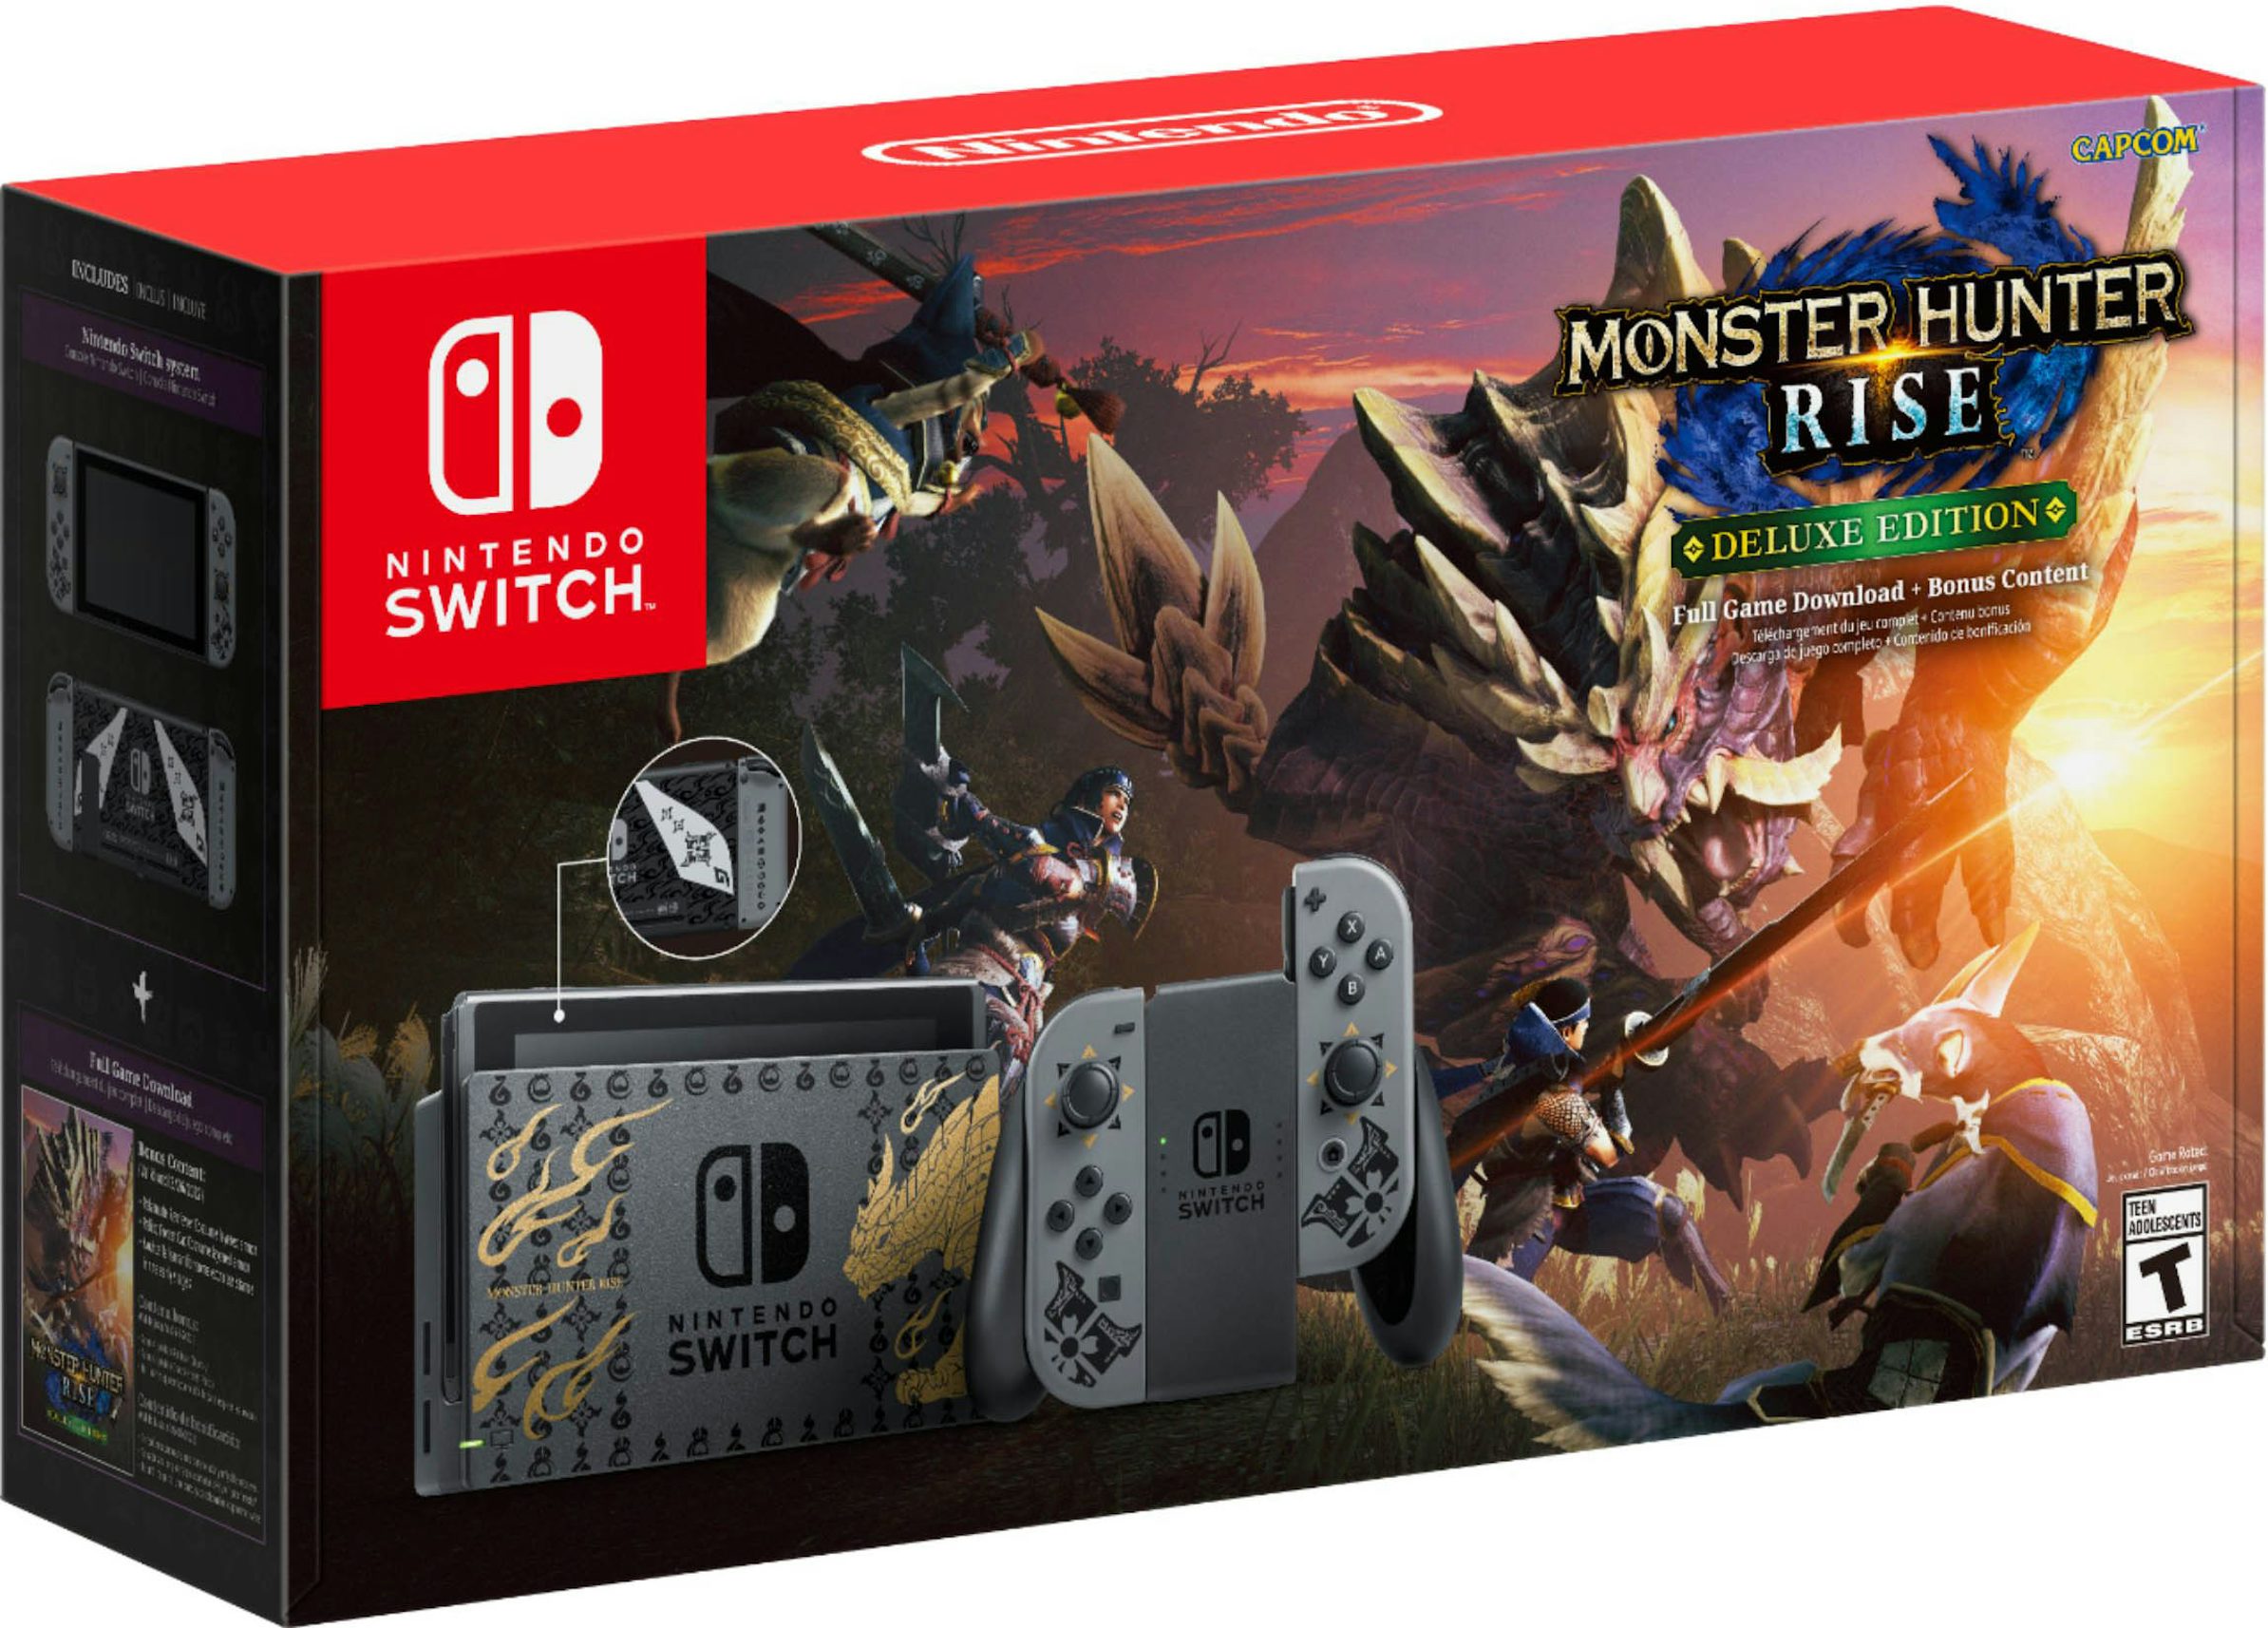 Nintendo Grey System Hunter - Edition Monster Deluxe Switch Rise HADSKGALG US